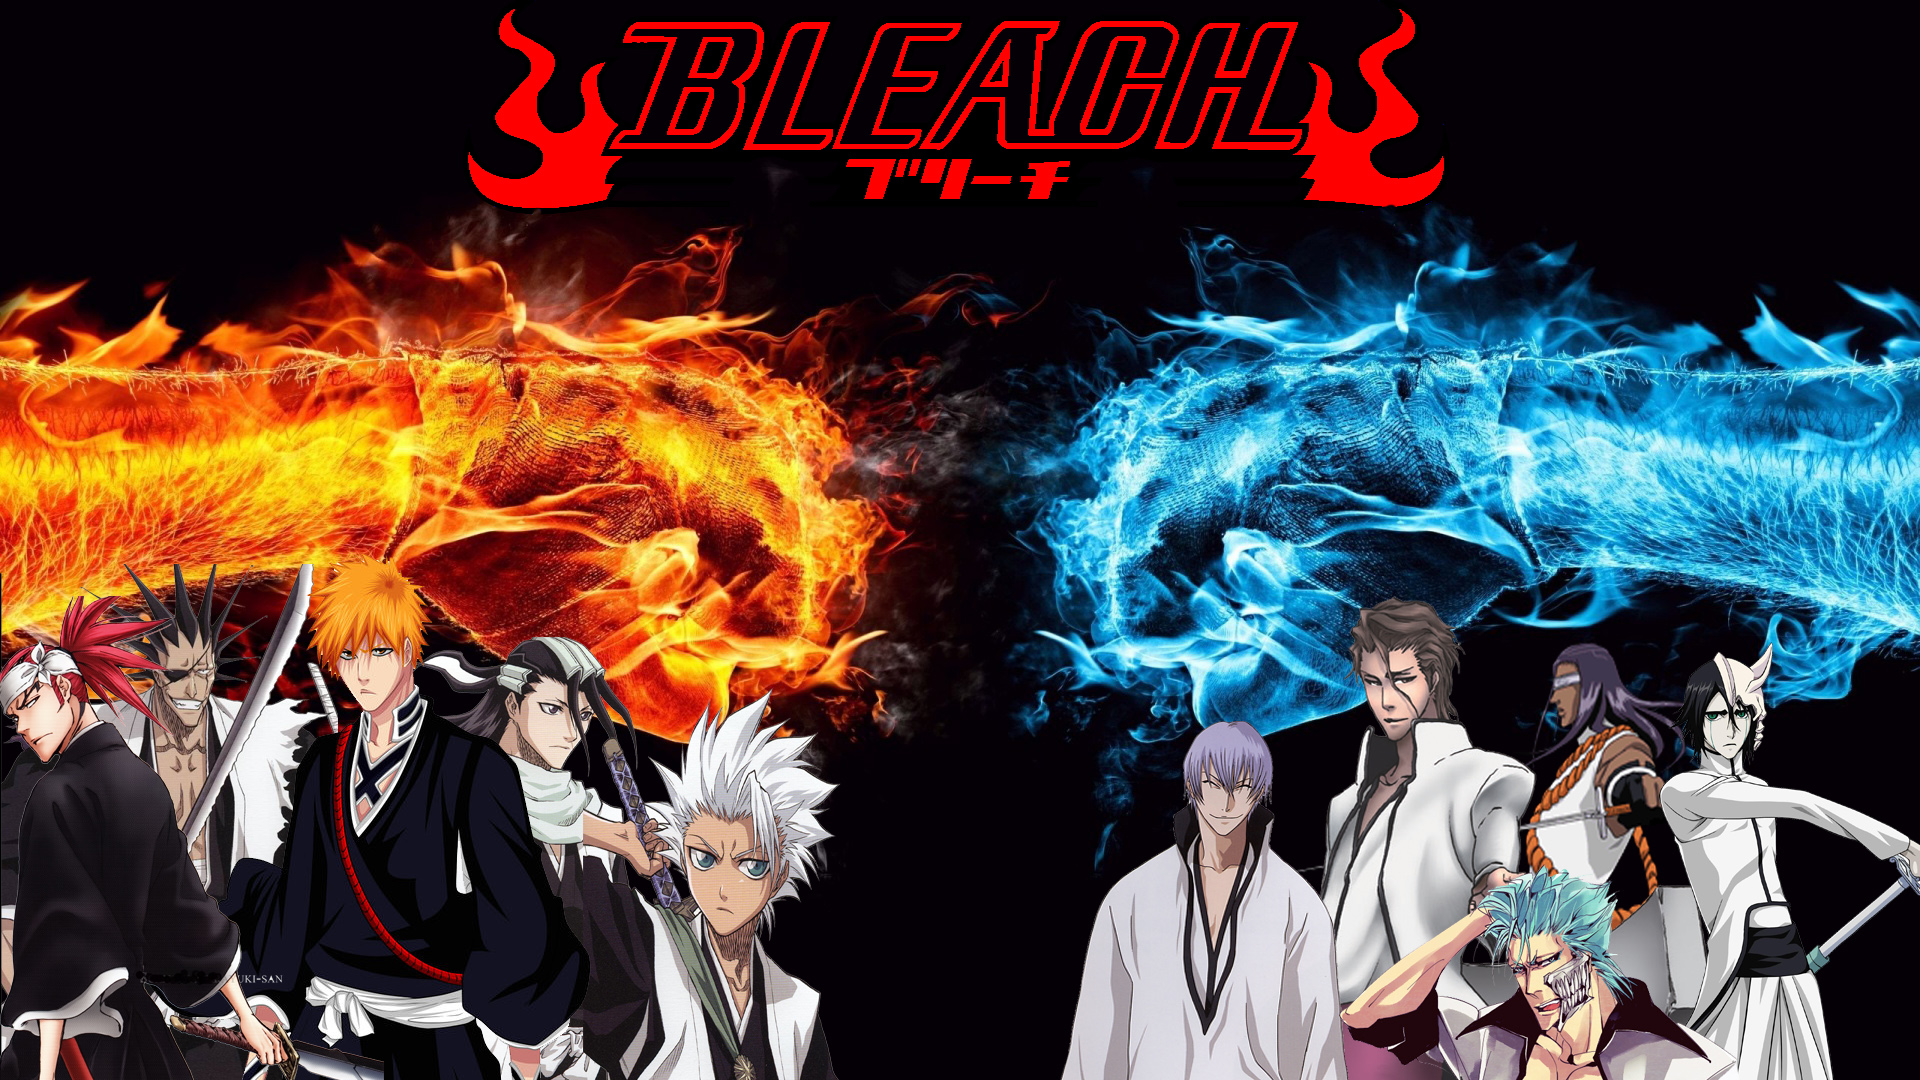 Under The Anime Wallpaper Category Of HD Bleach